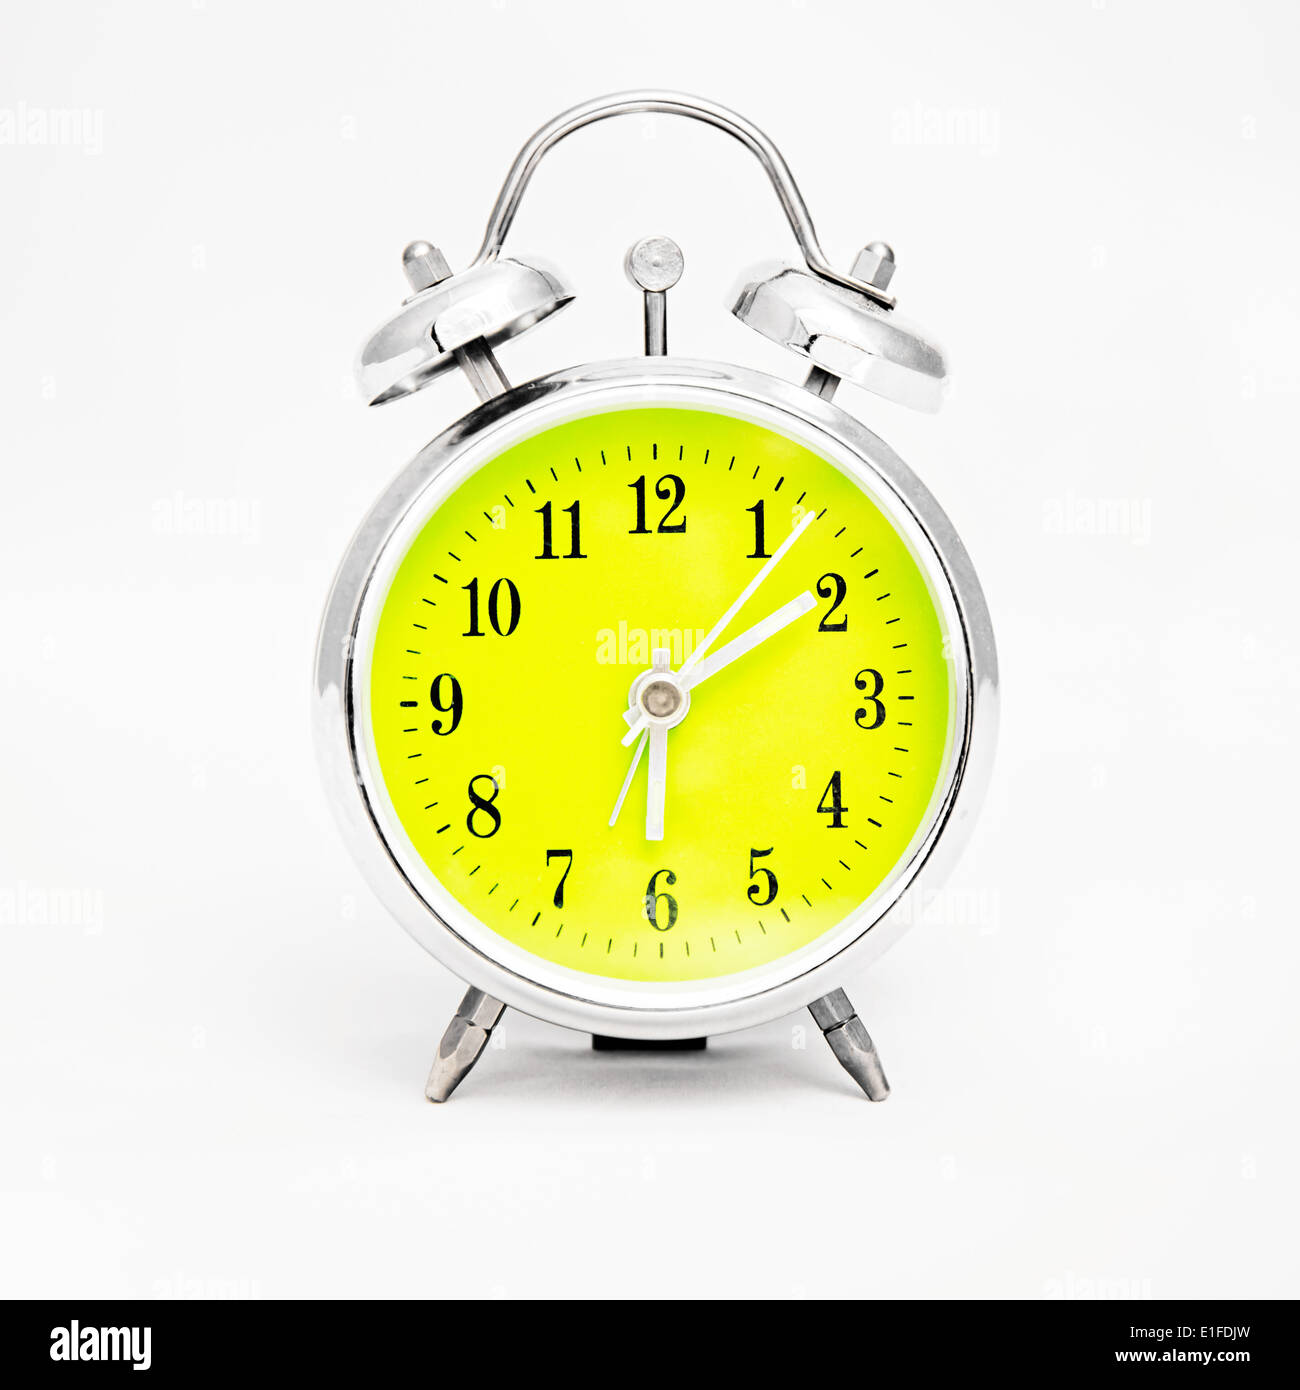 Alarm clock on white background. Showing time ten minutes past six Stock Photo